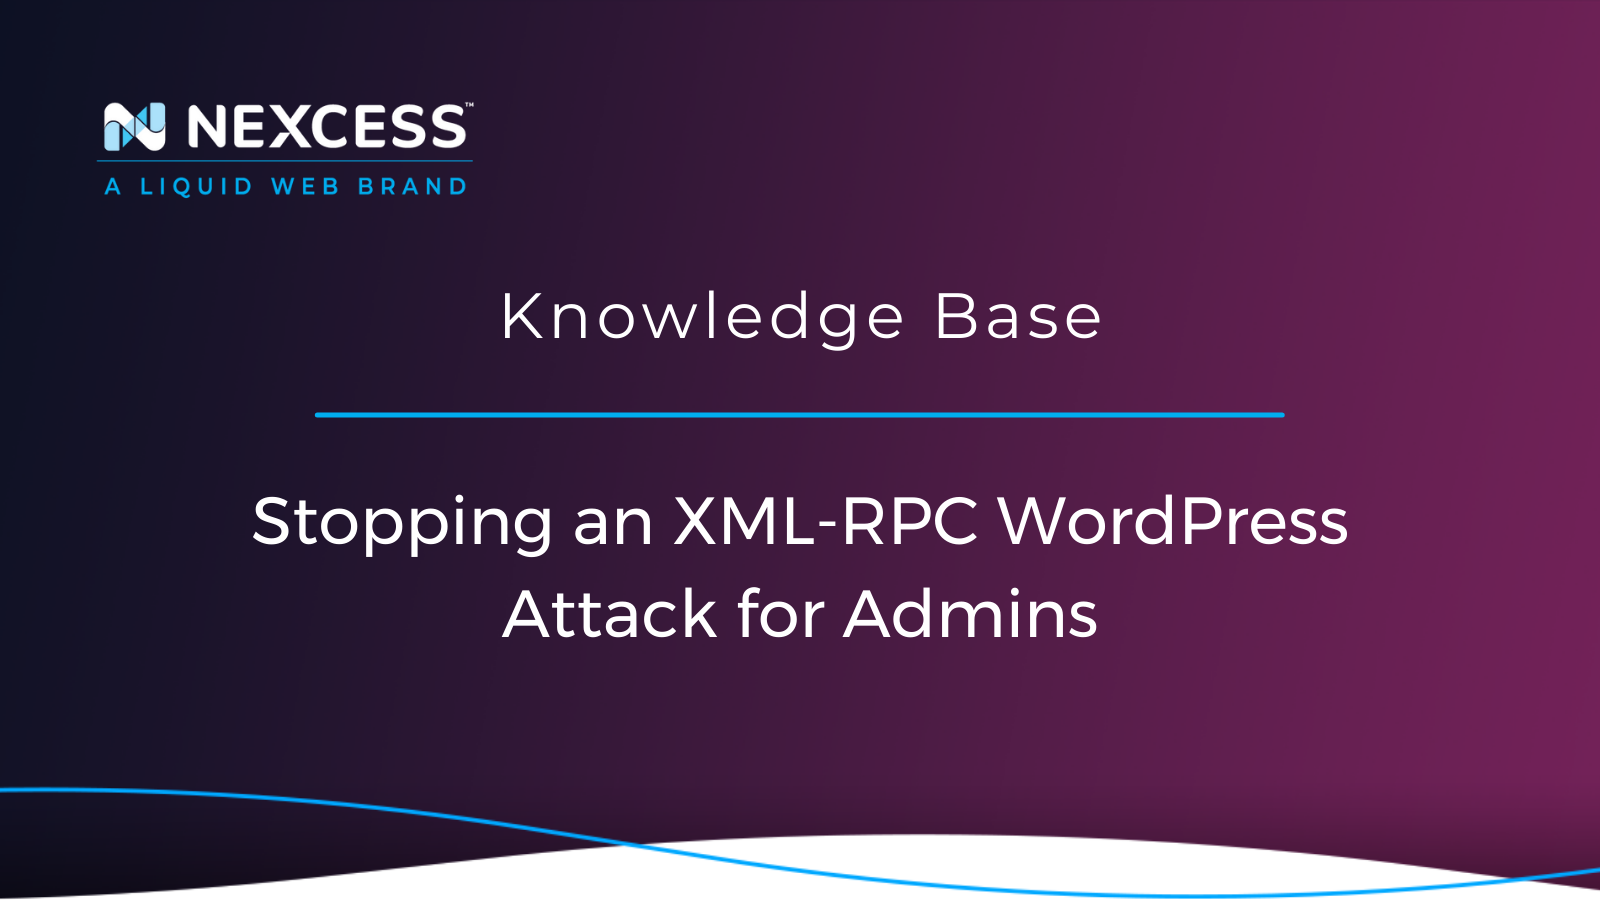 Stopping an XML-RPC WordPress Attack for Admins